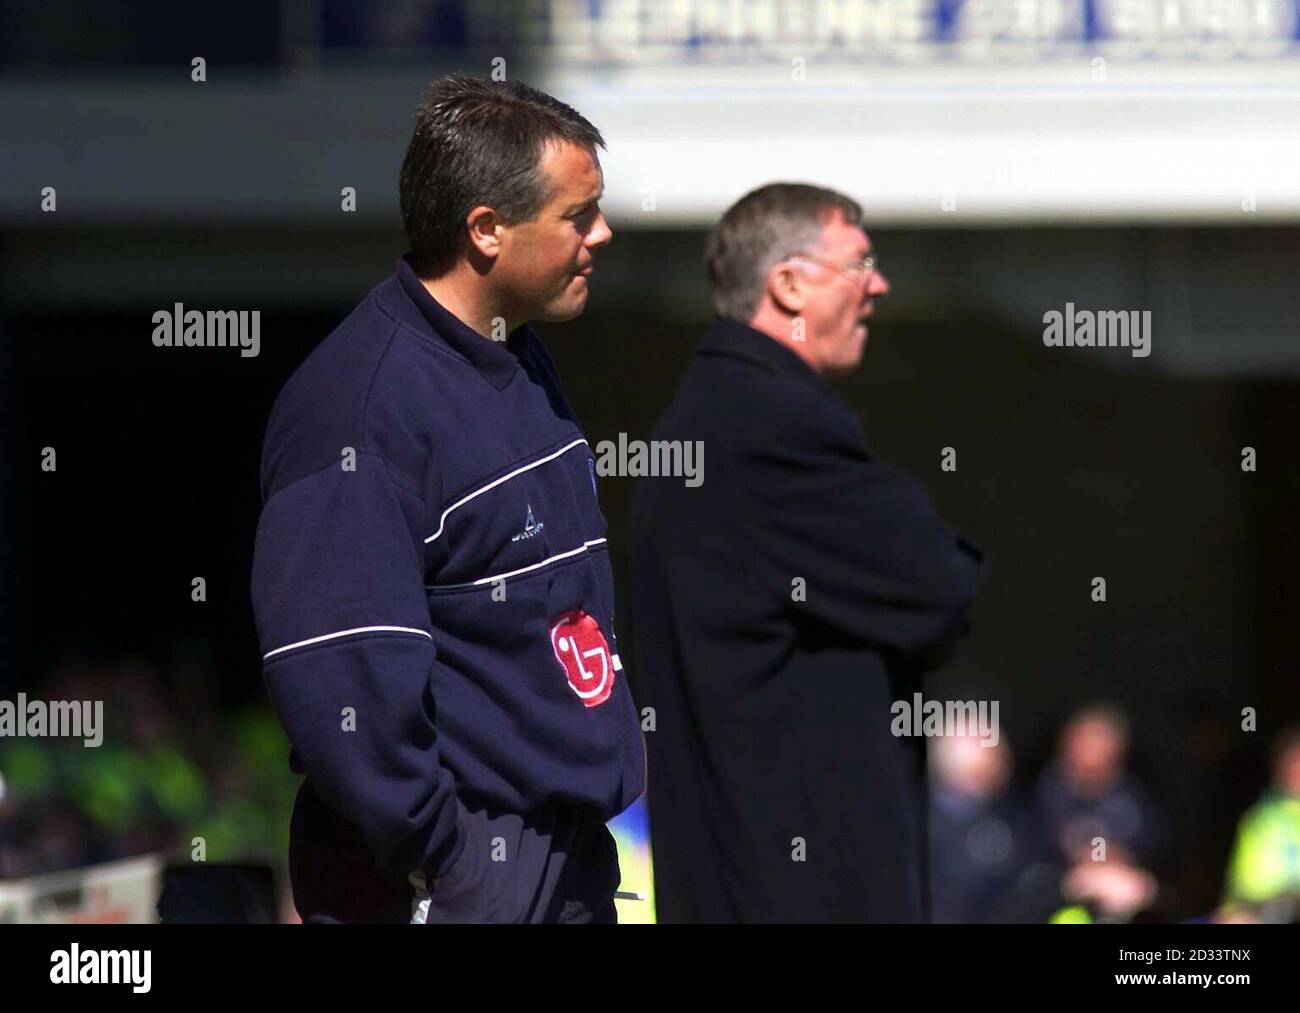 Leicester City's assistant manager Micky Adams (left) and Manchester United's manager Alex Ferguson look on during the FA Barclaycard Premiership match at Leicester's Filbert Street stadium. Micky Adams is to succeed current Leicester manger Dave Basset as Leicester City's new manager from Monday. Stock Photo